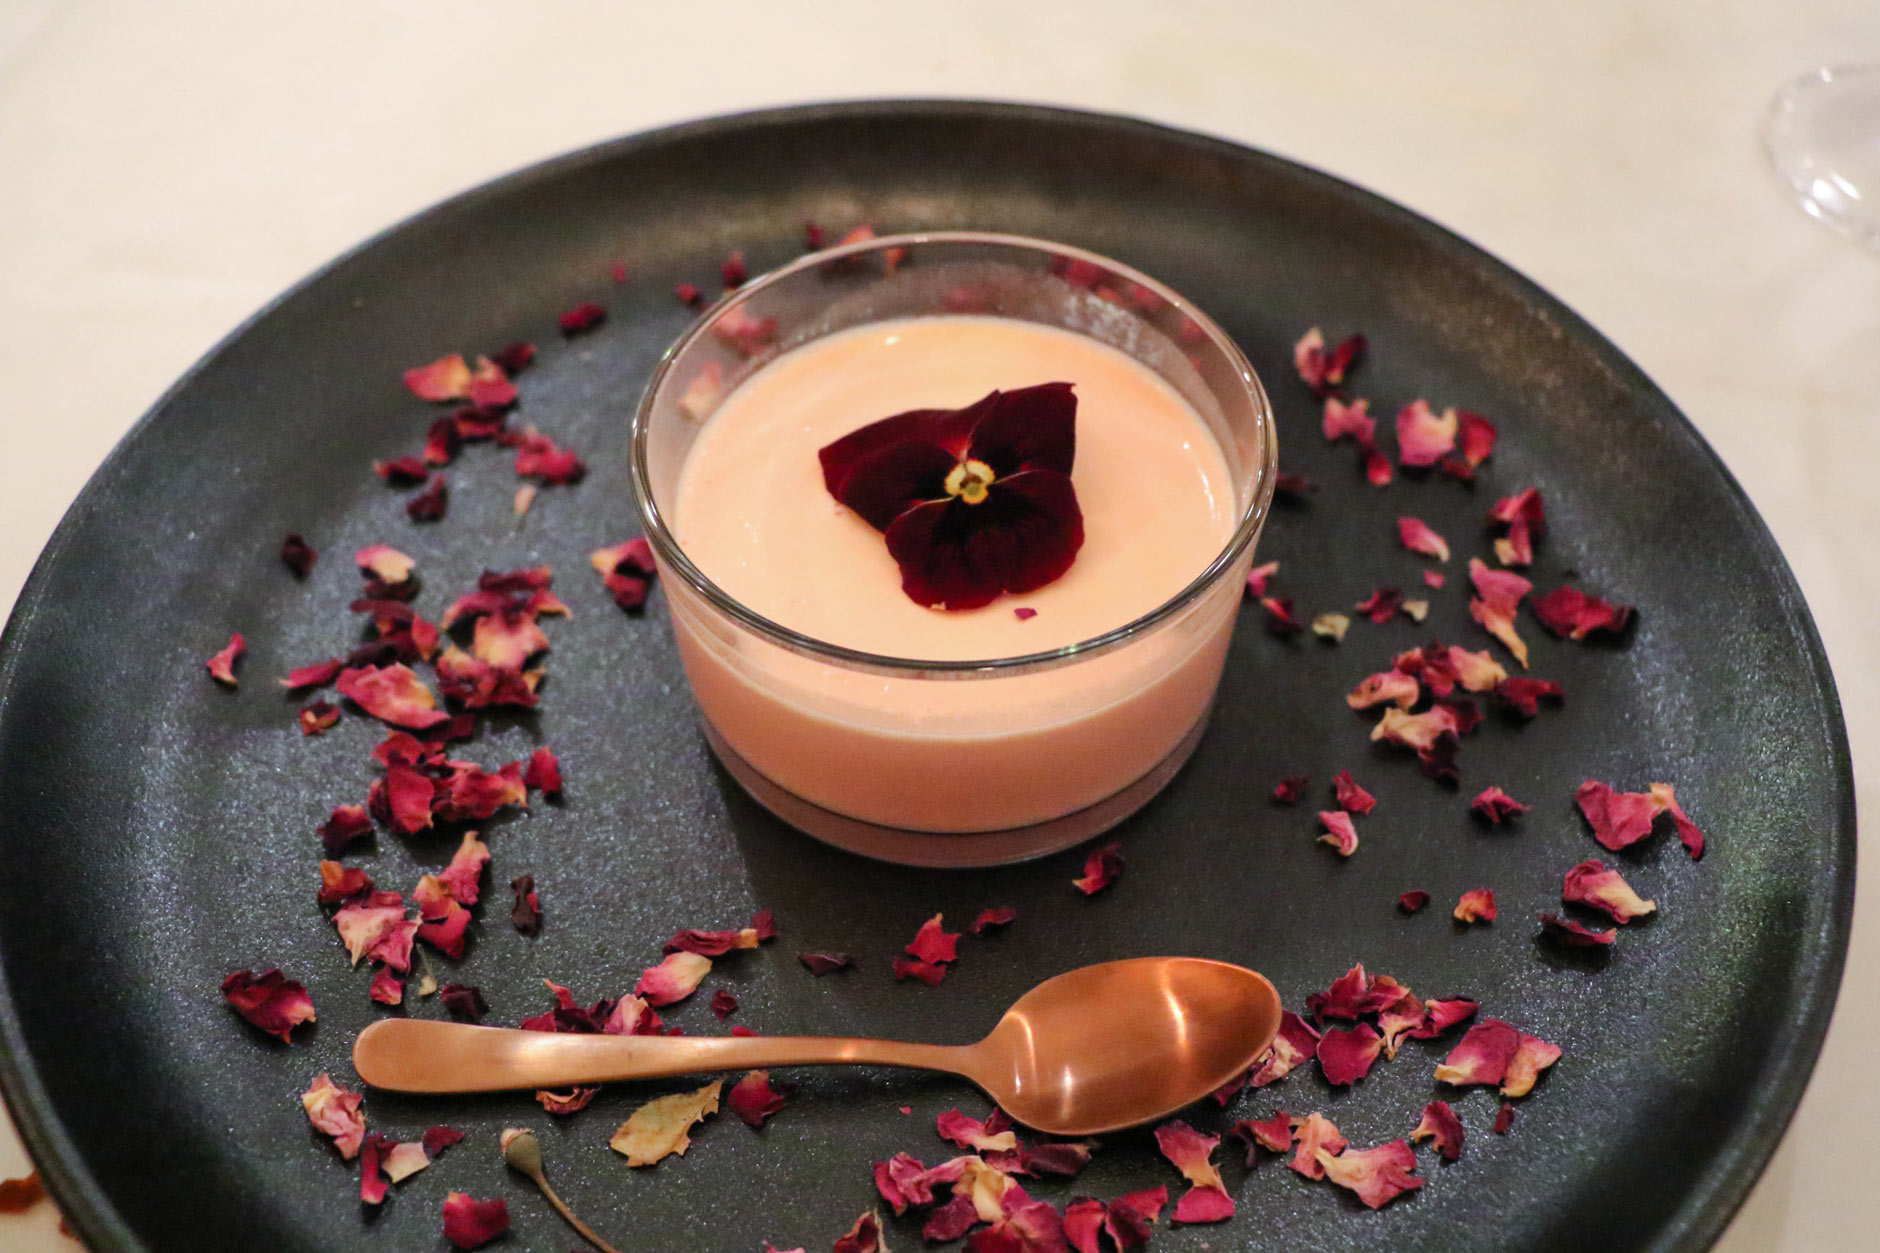 Review: Spice Theory Turramurra - Rose Panna Cotta